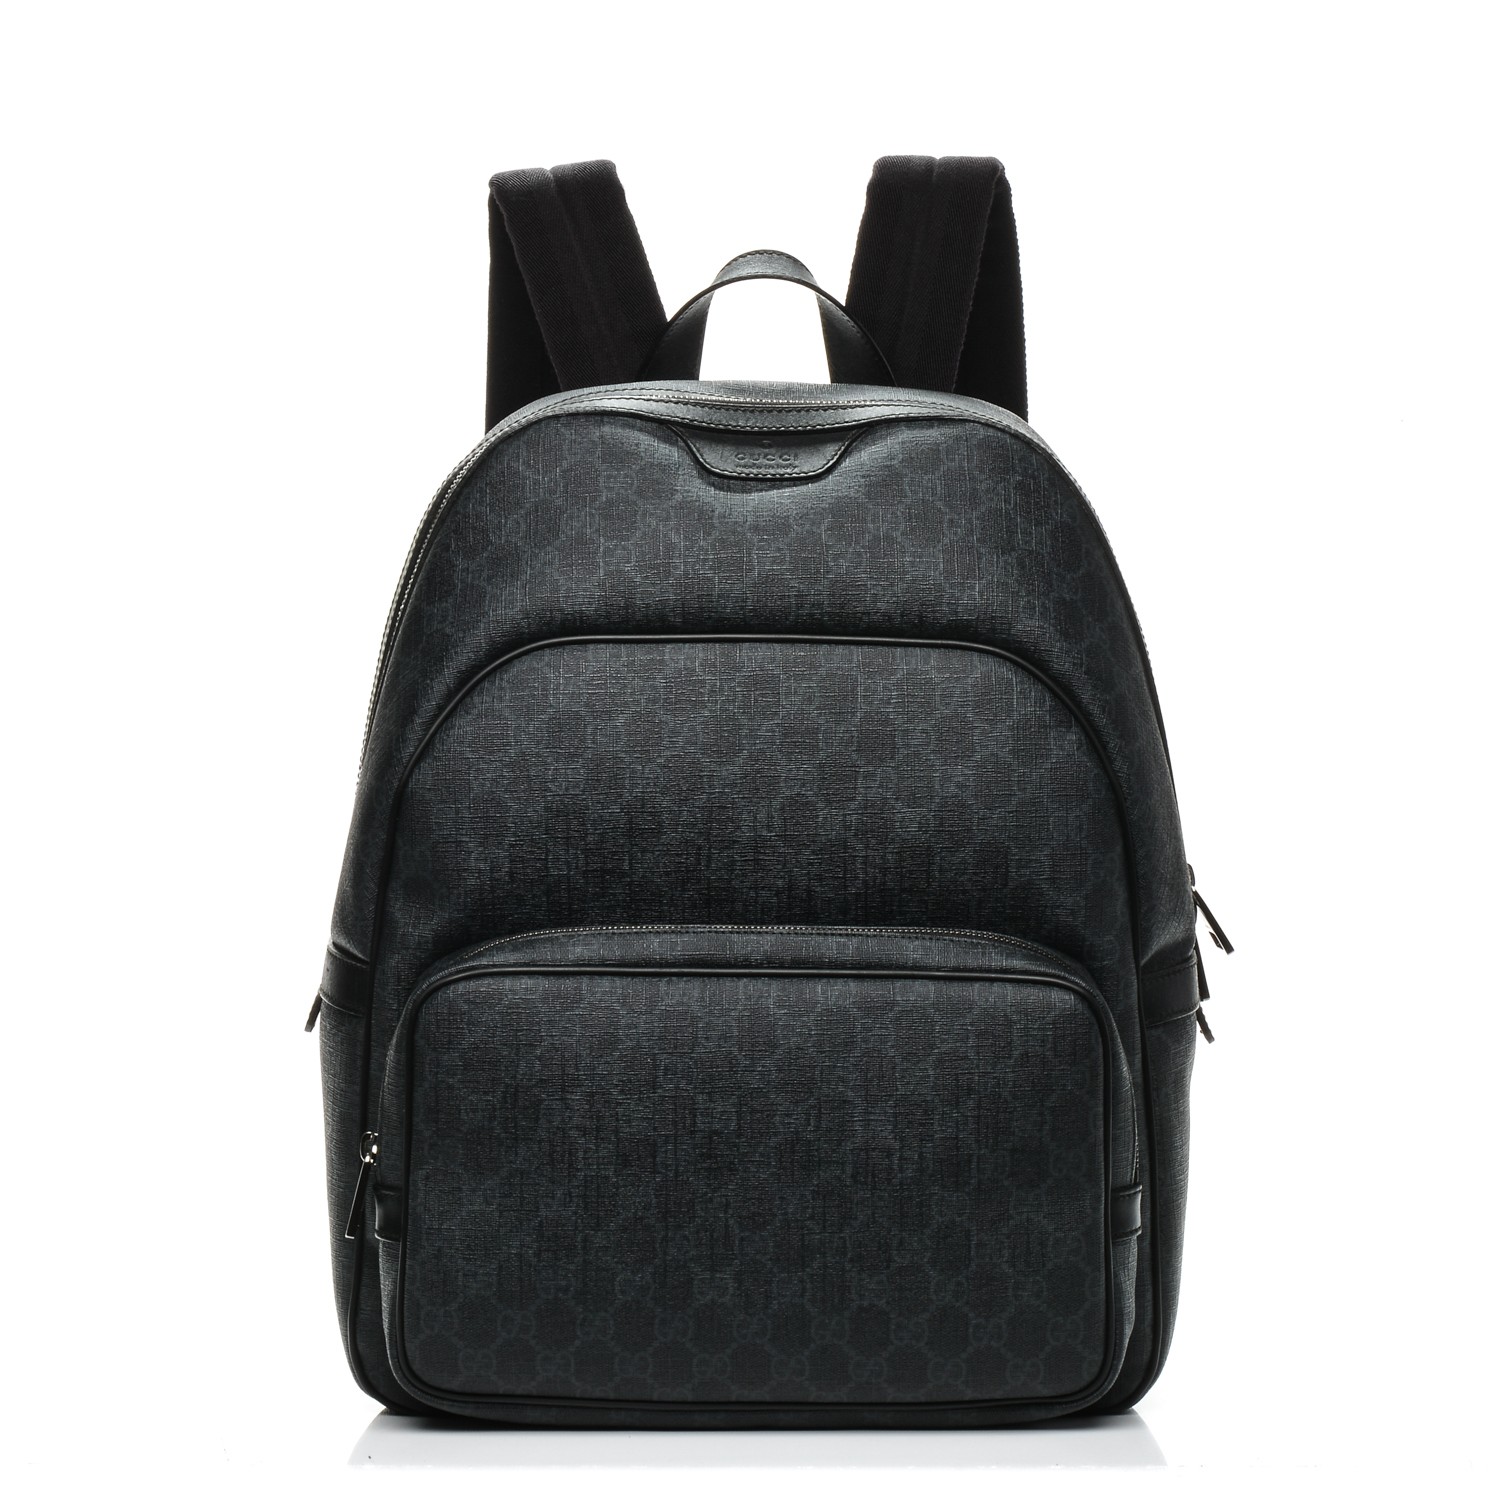 black and grey gucci backpack